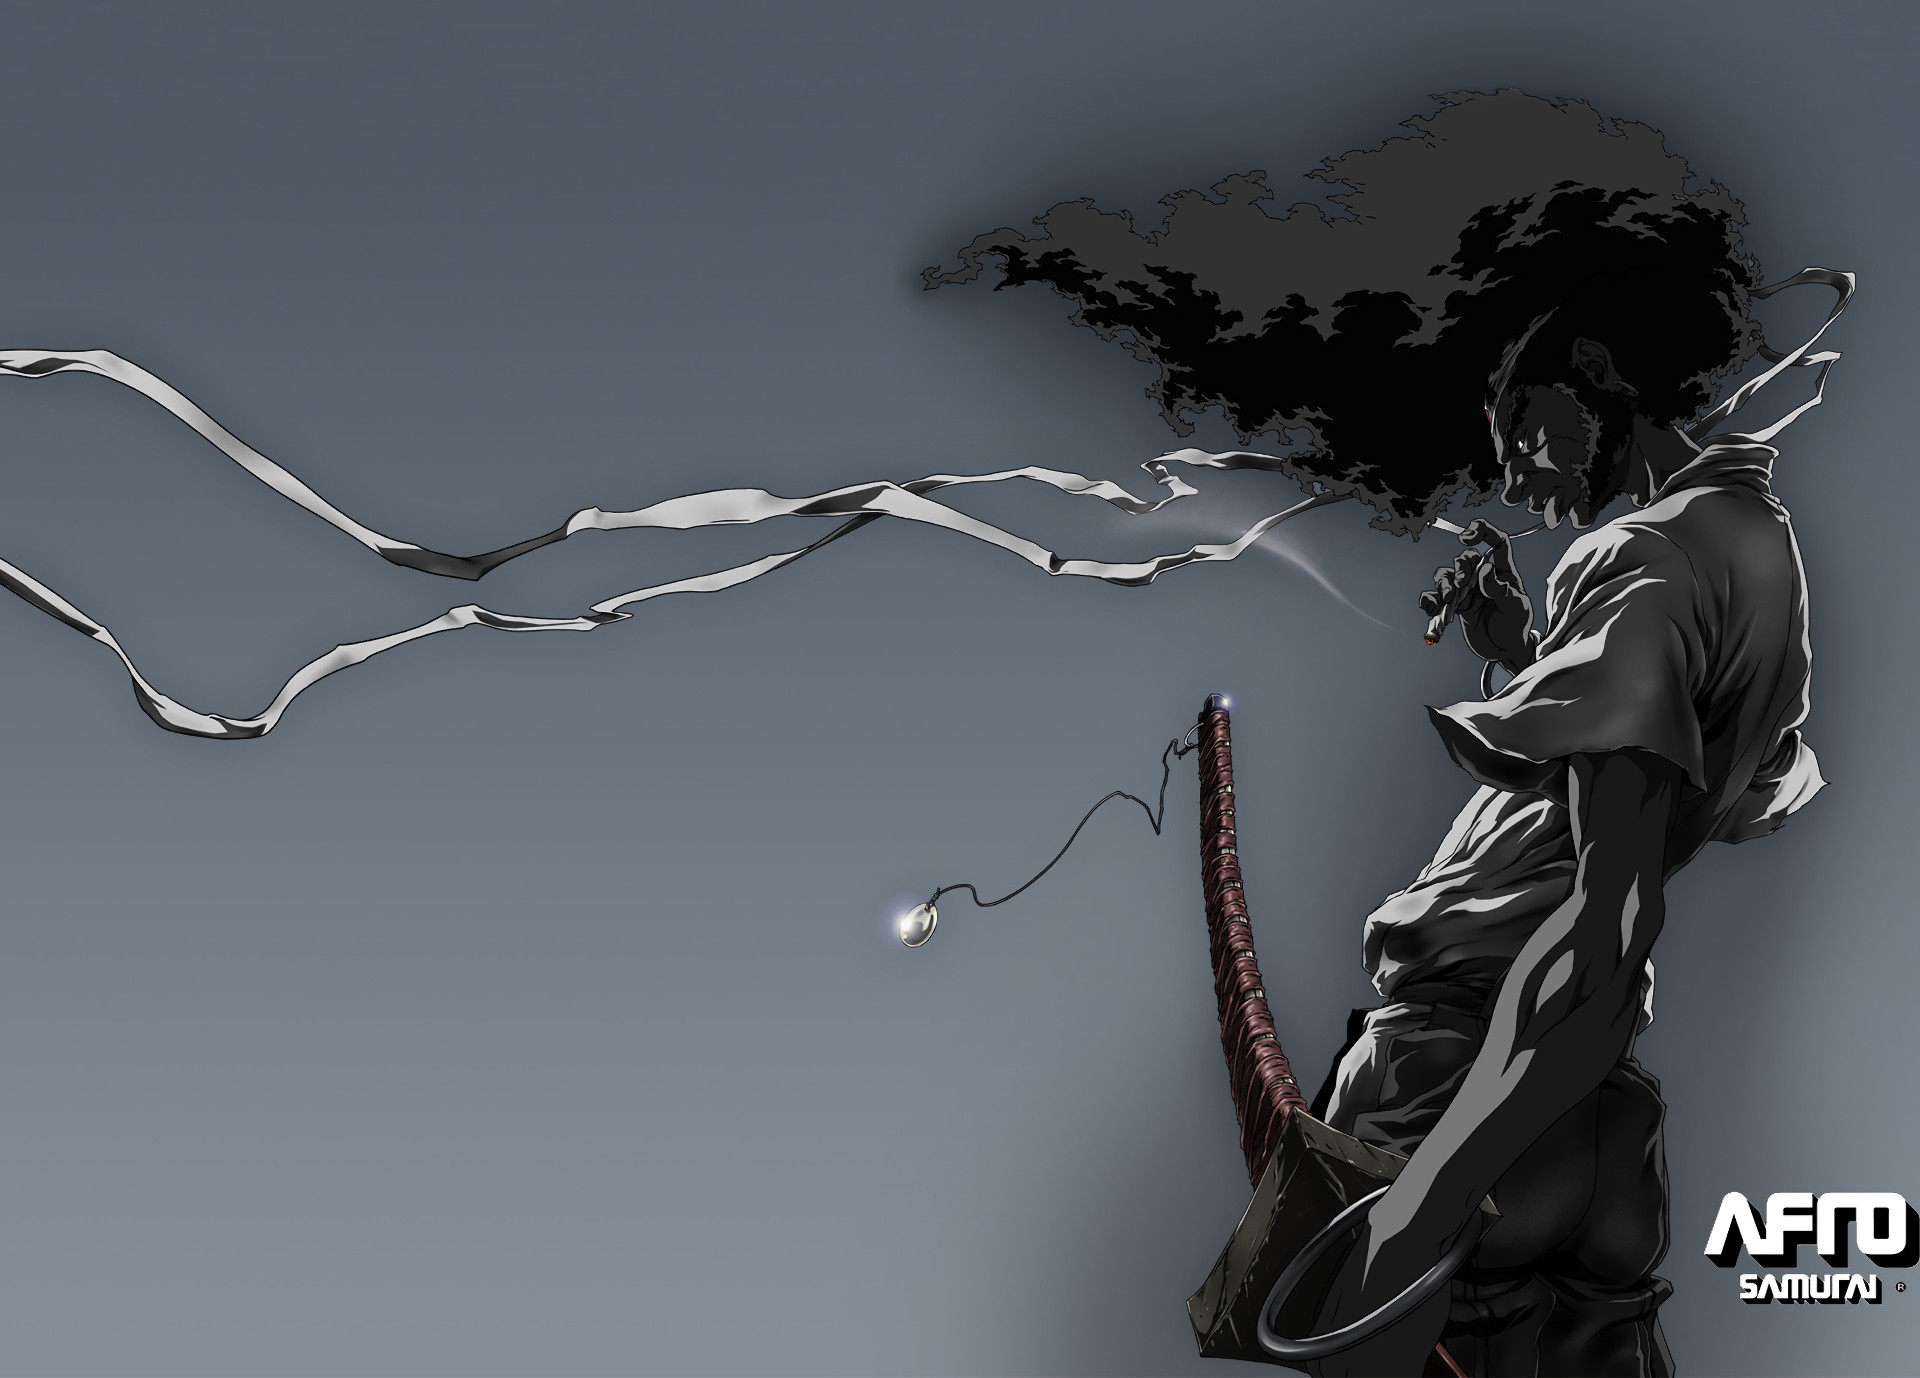 Explore More Wallpapers in the Afro Samurai Subcategory!